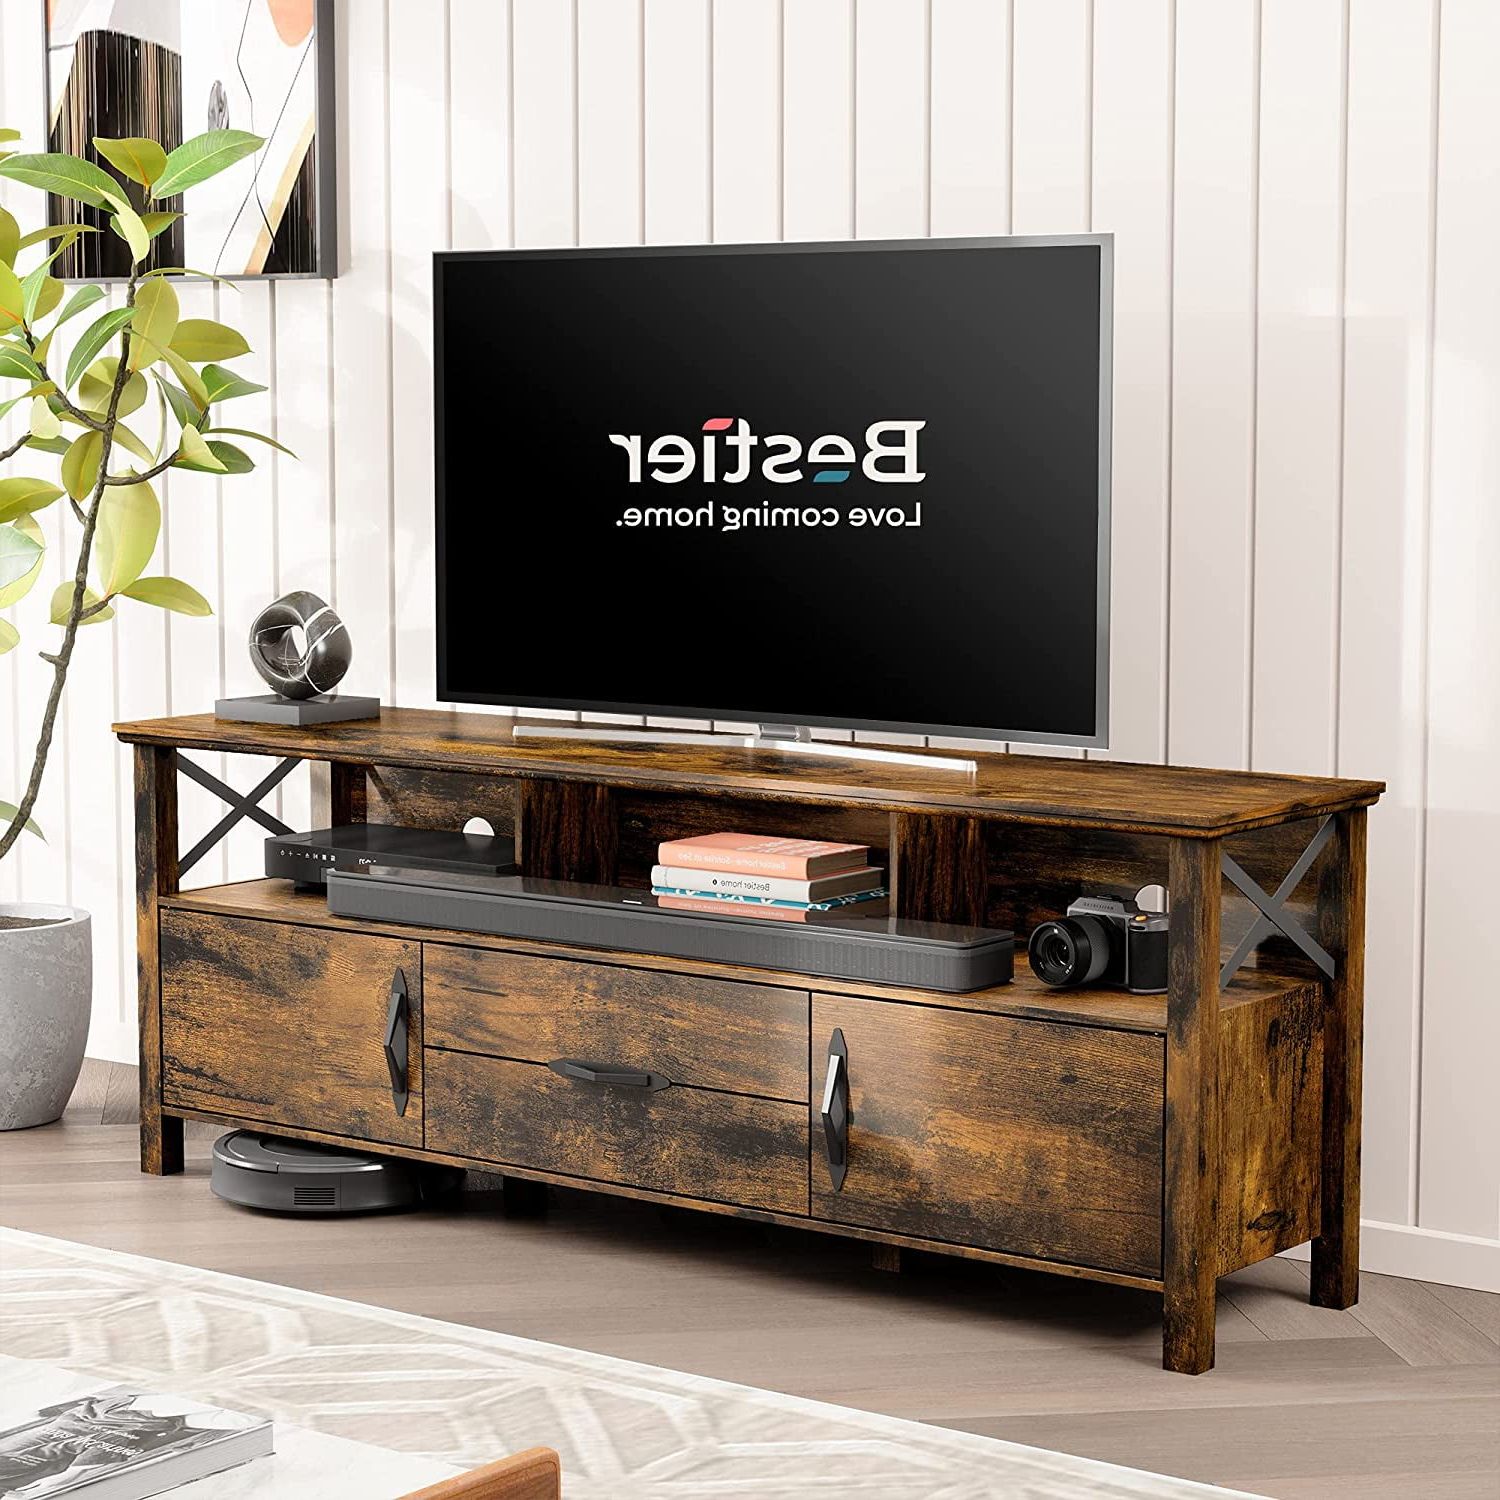 Bestier Farmhouse Entertainment Center Tv Stand With Drawer For Tvs Up Pertaining To 2020 Bestier Tv Stand For Tvs Up To 75" (View 4 of 15)